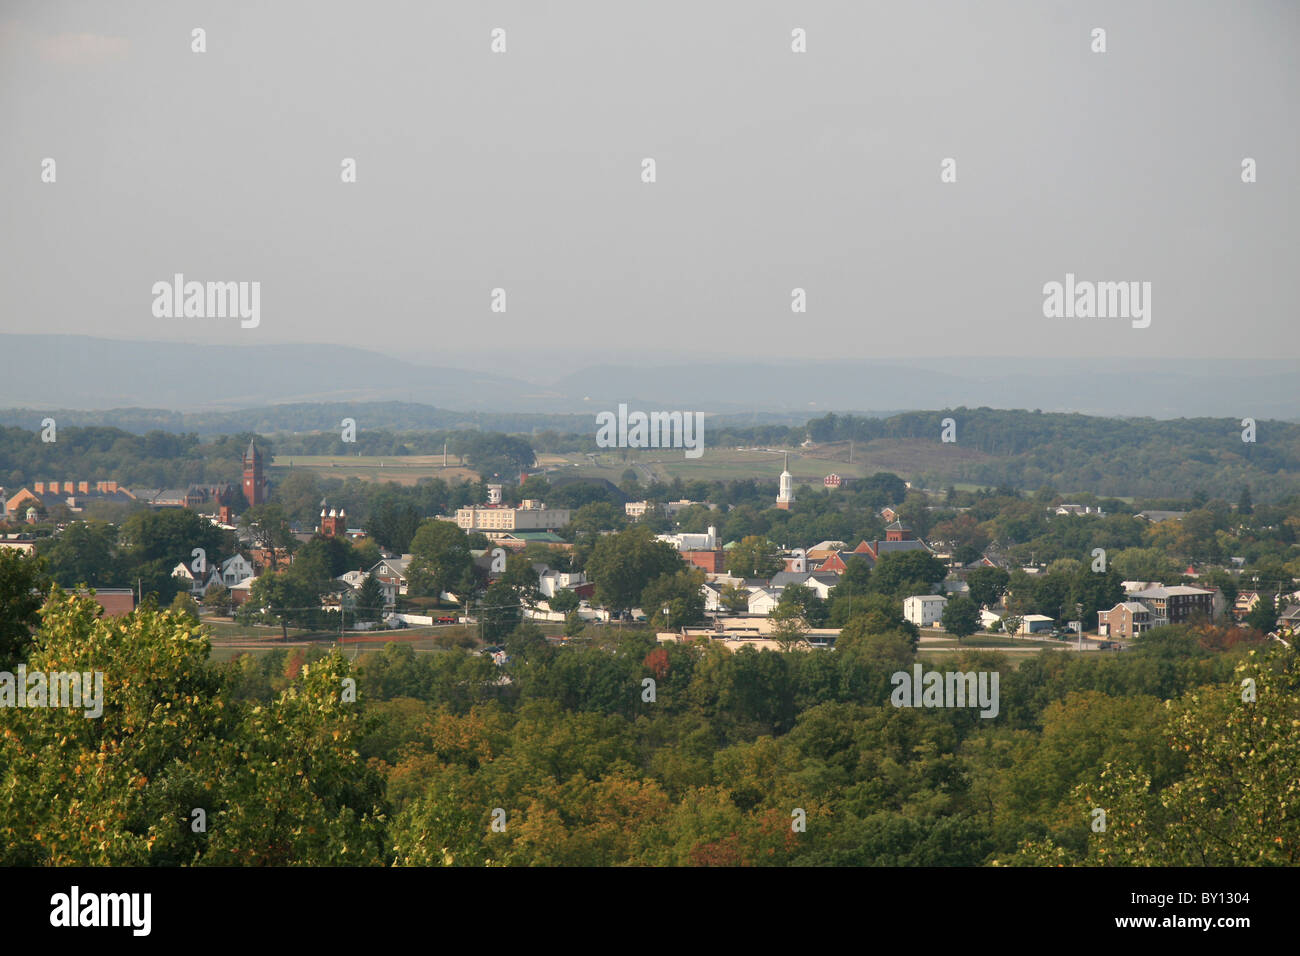 View over the town of Gettysburg from Culps Hill, Pennsylvania, United States. Stock Photo